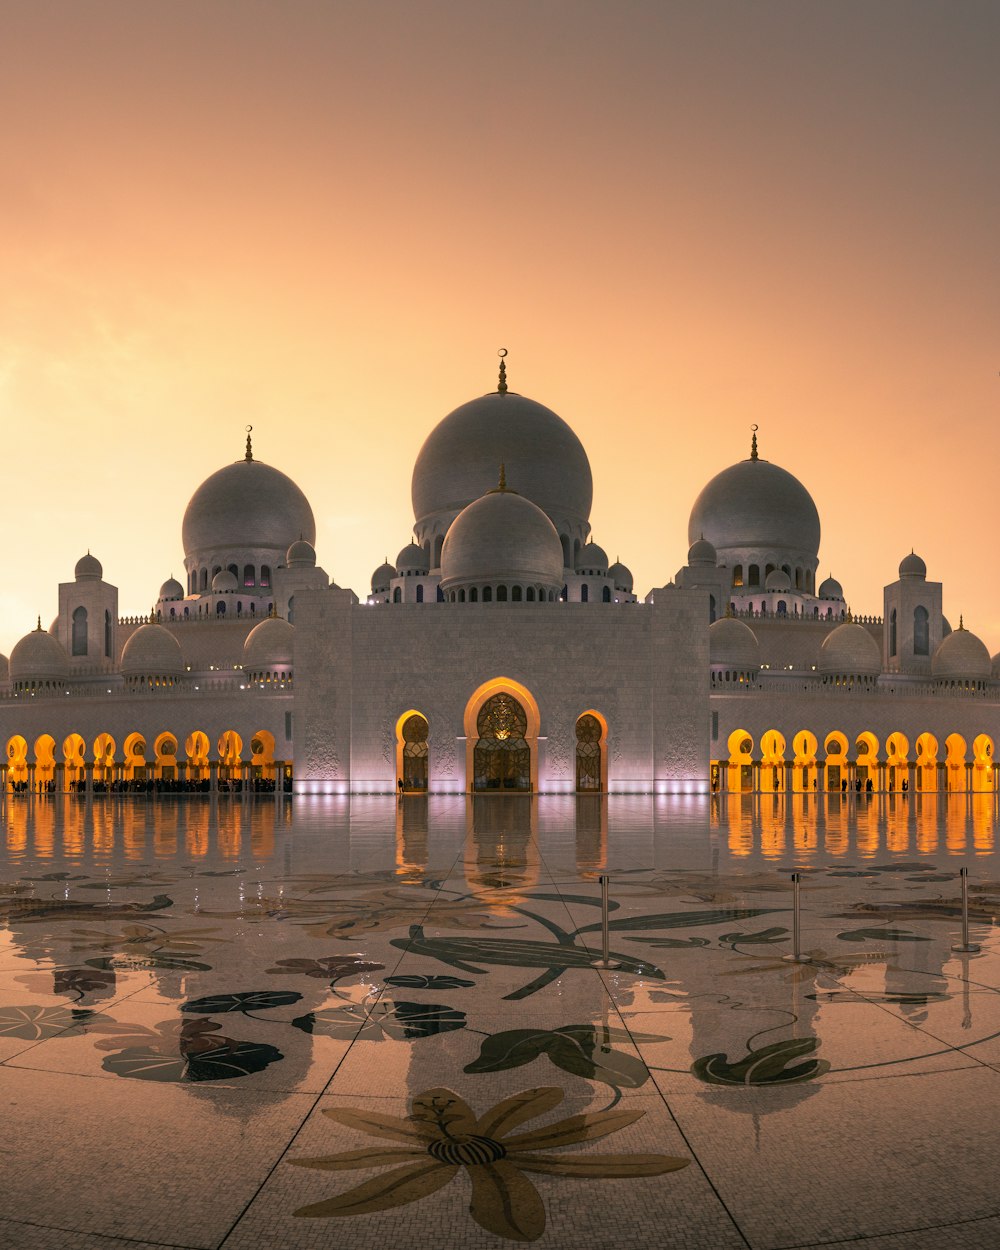 350+ Mosque Pictures [HD] | Download Free Images on Unsplash